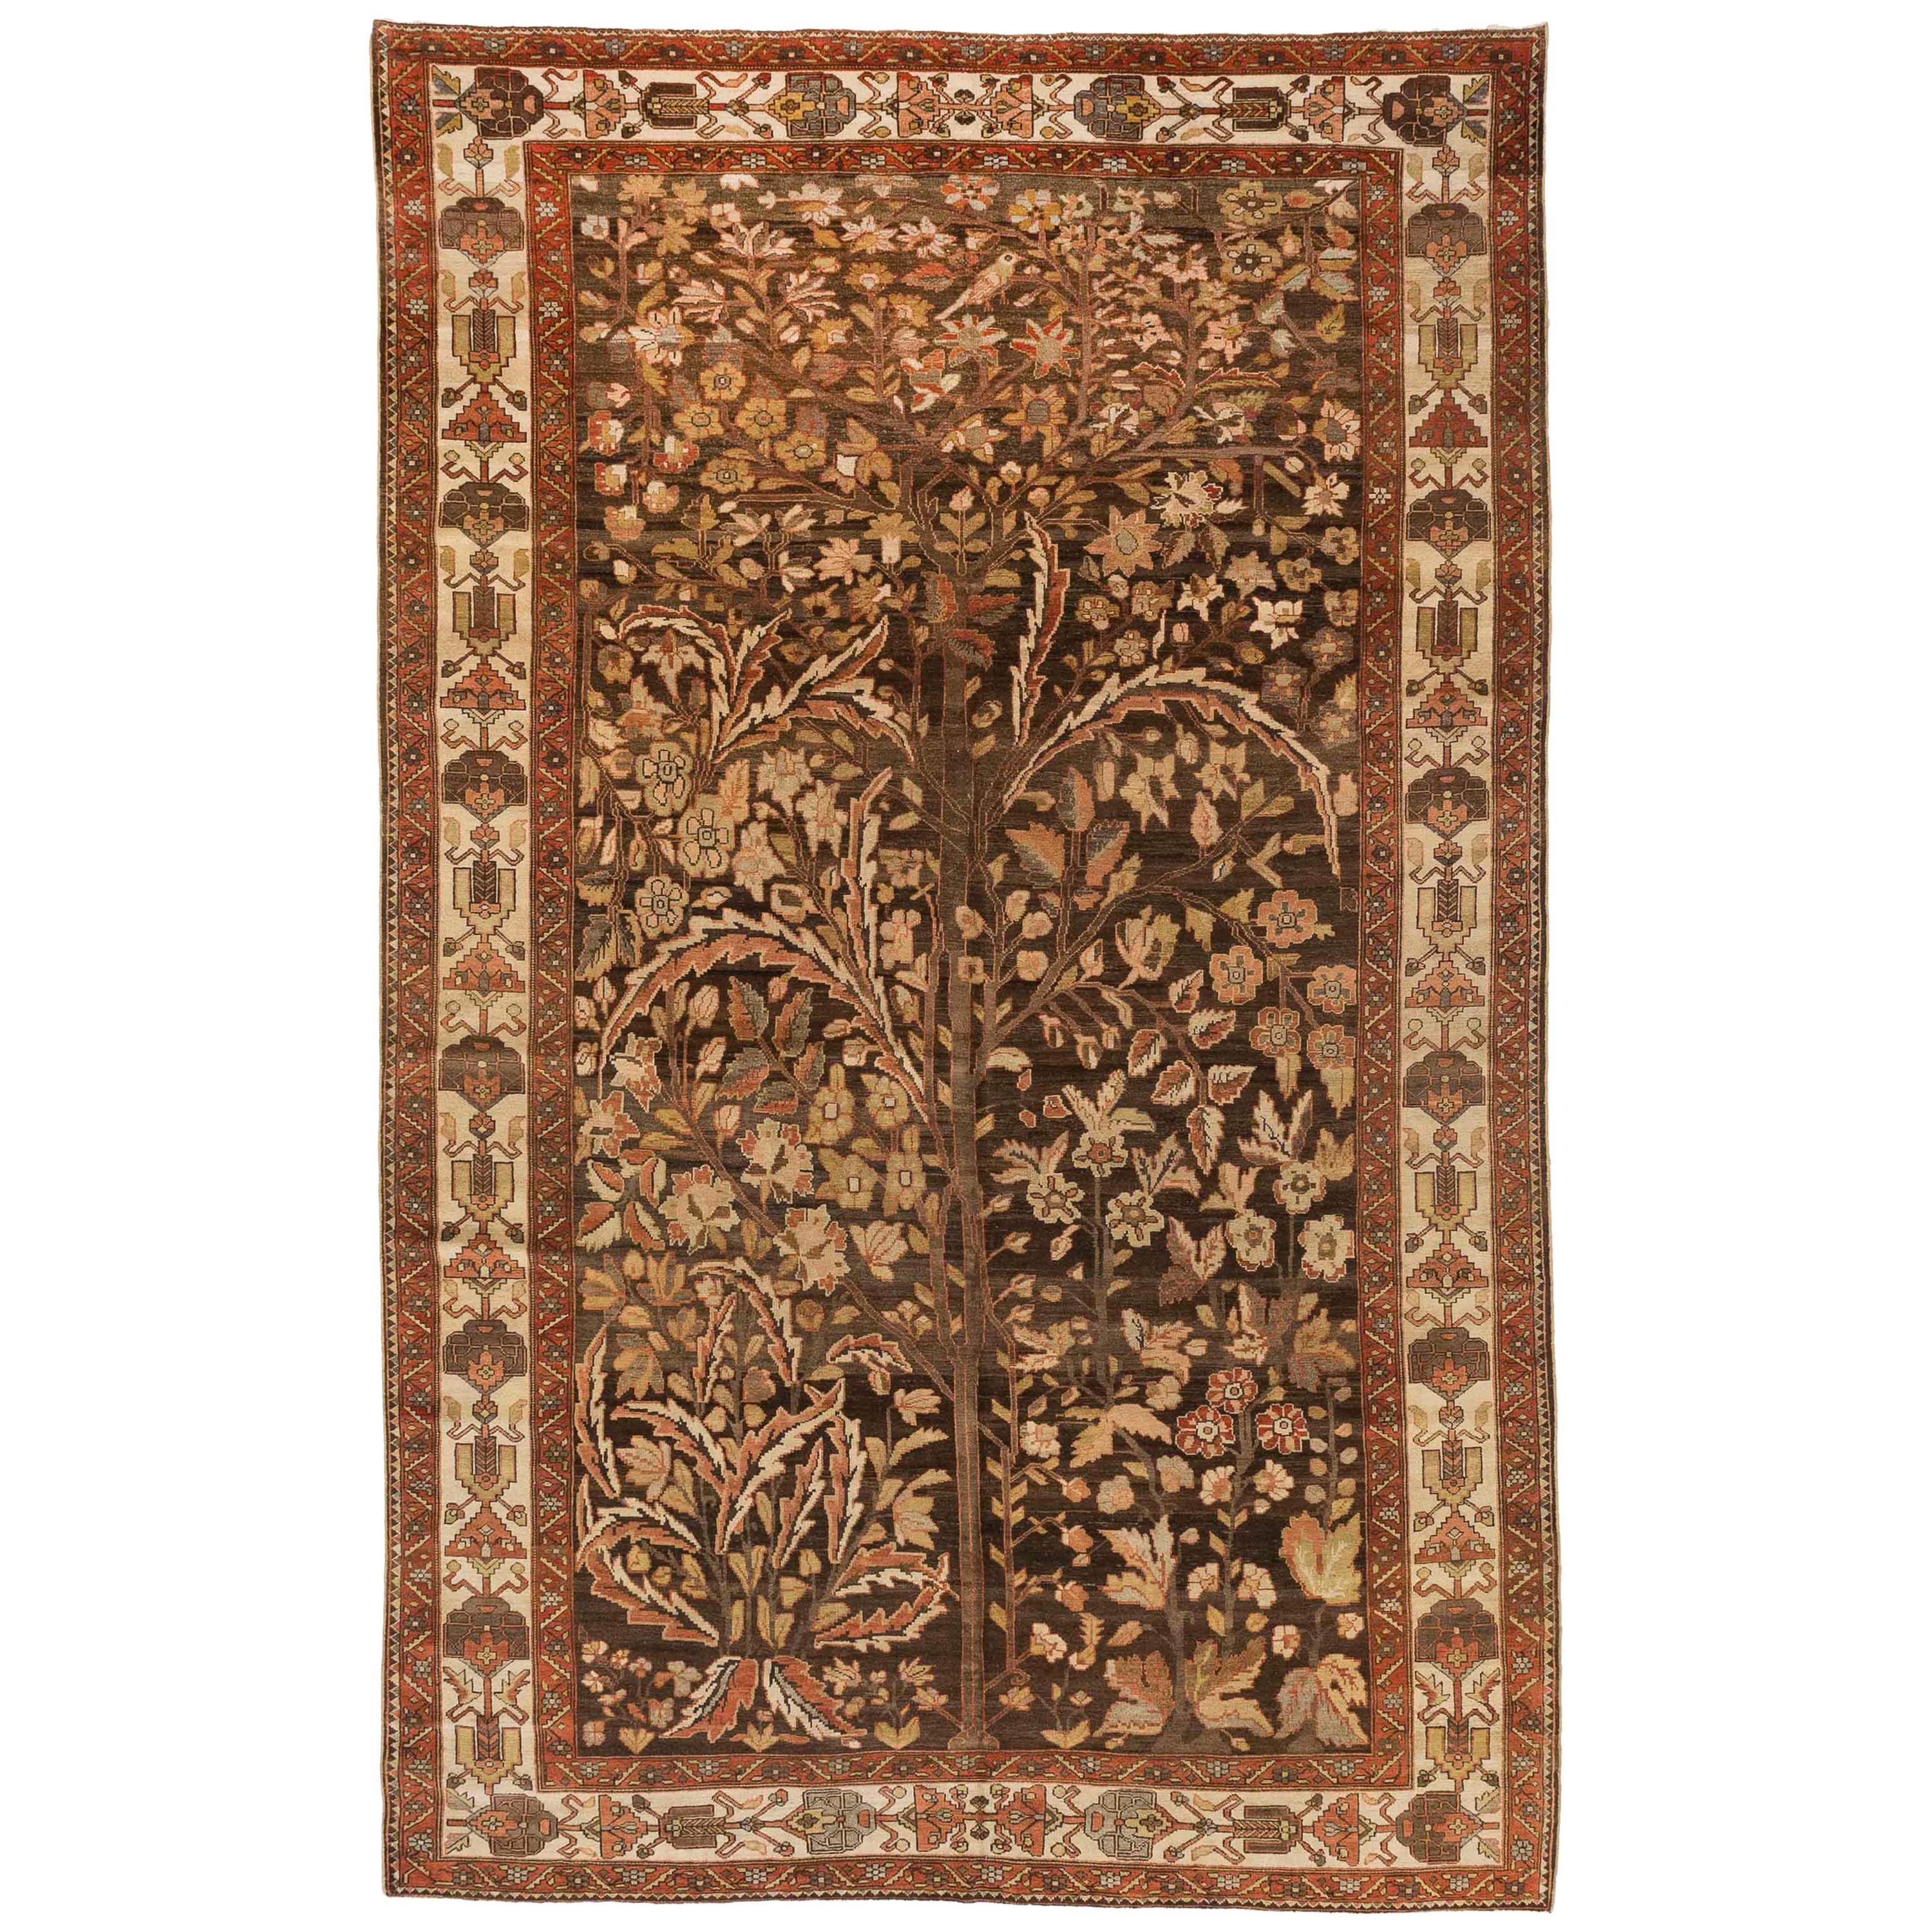 1940s Antique Persian Rug Bakhtiar Design with ‘Tree of Life’ Floral Patterns